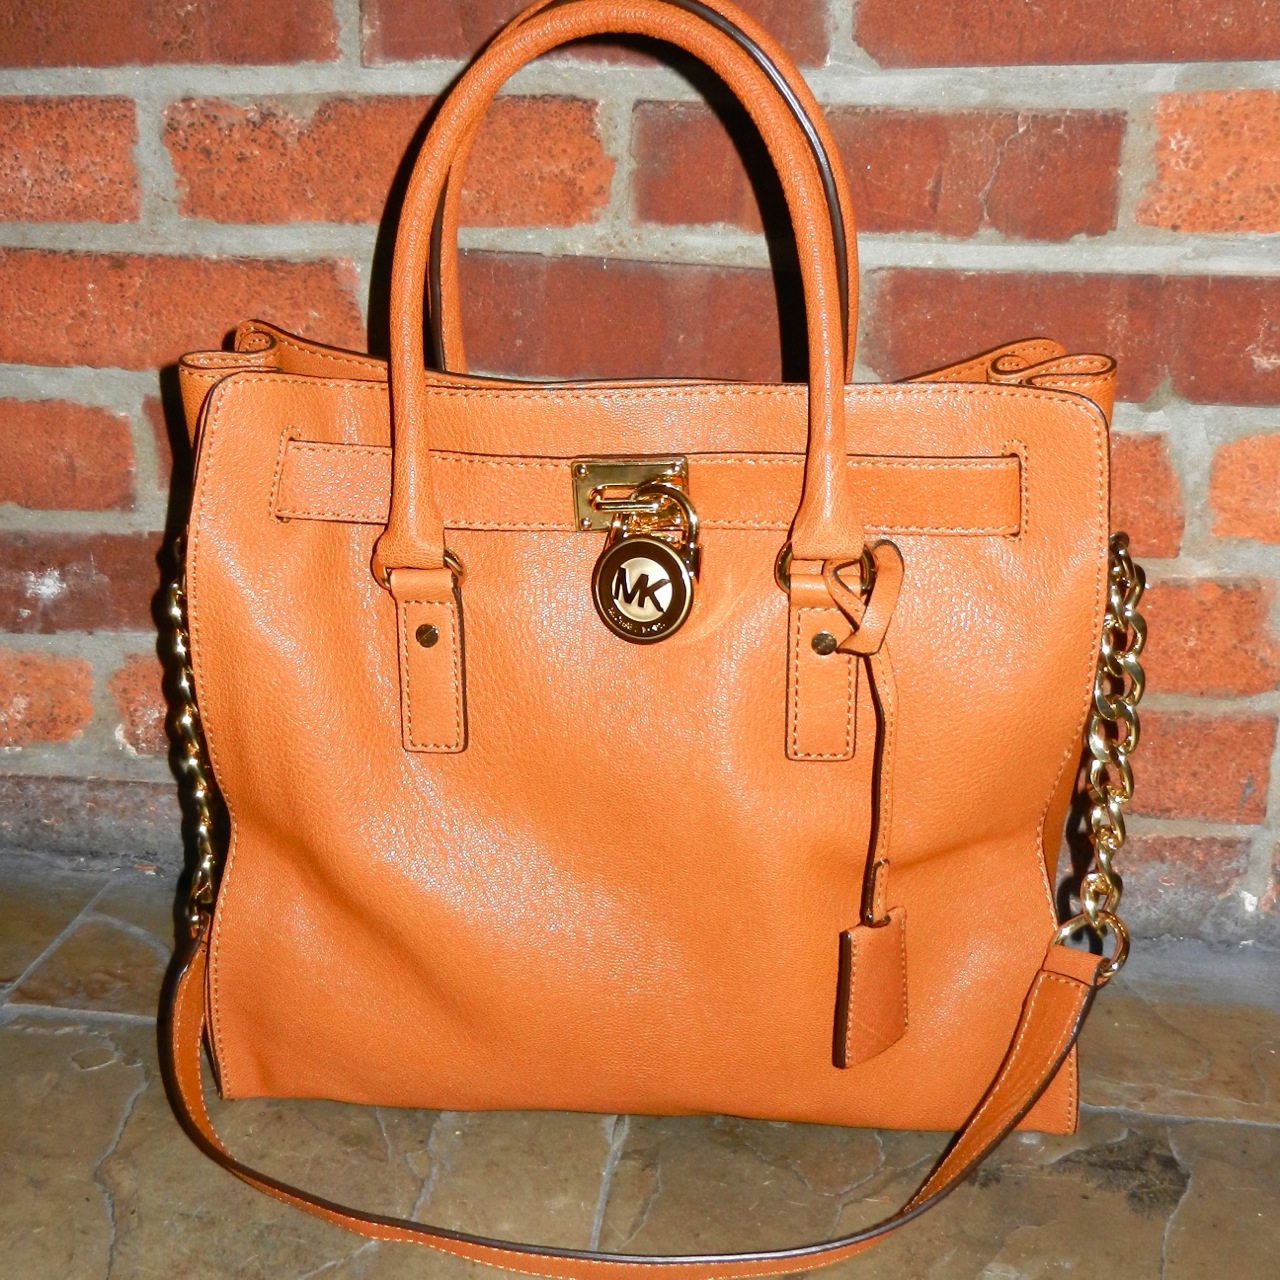 Looking Back, Looking Forward: Michael Kors Hamilton Tote - Economy of Style